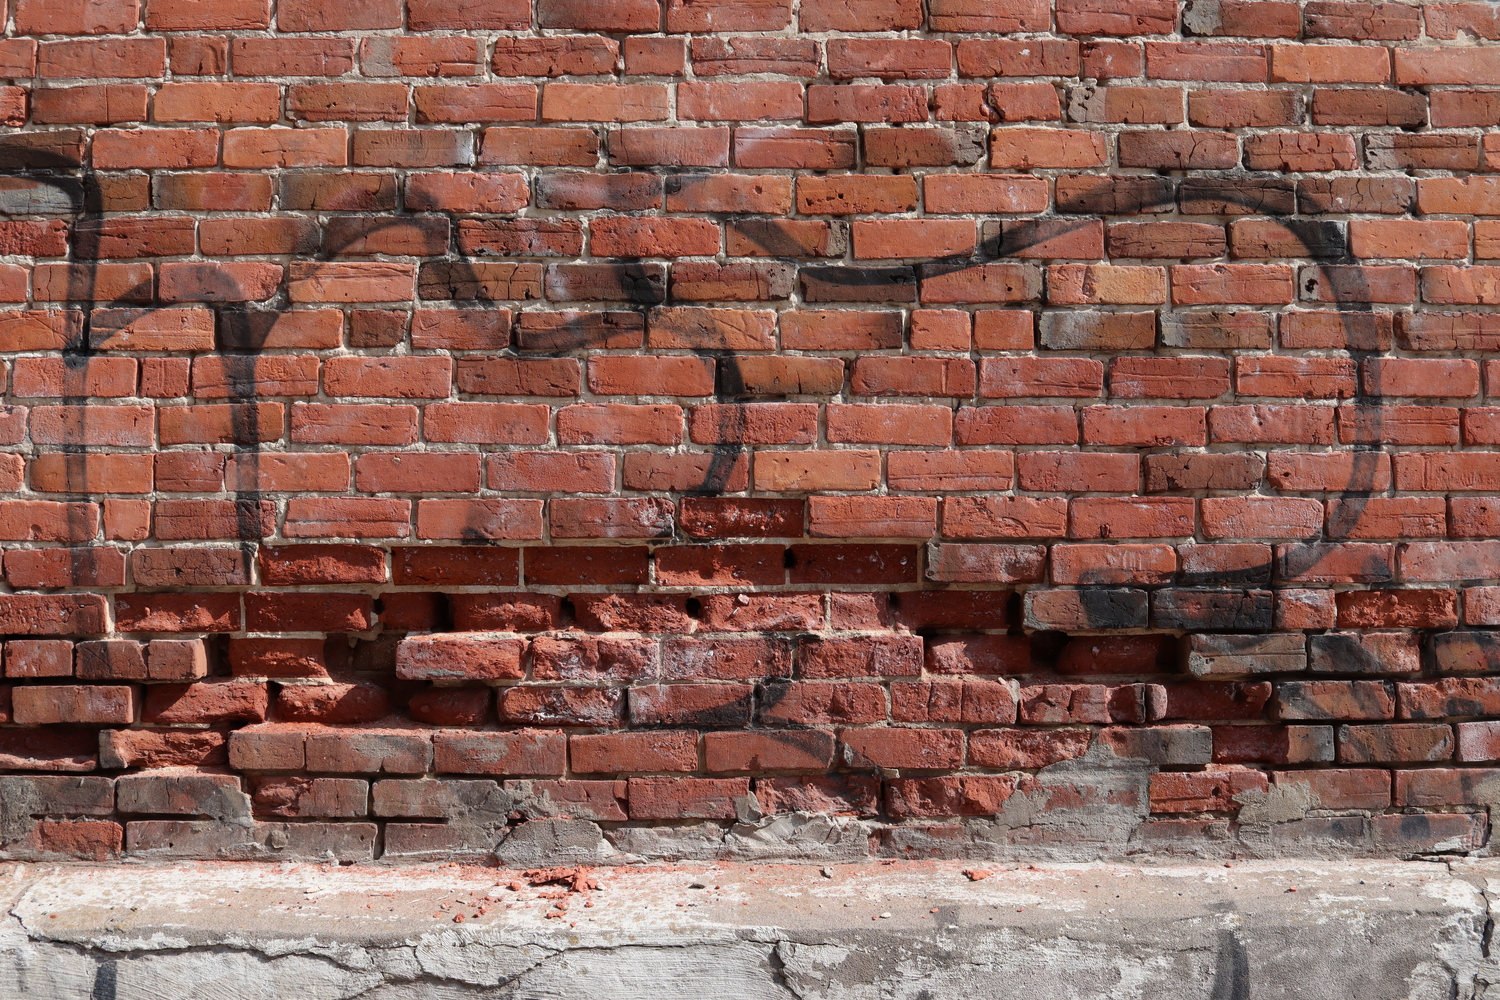 a red brick wall with some faded black graffiti.
in the lower third, some bricks are missing
from the outer layer in an arc shape.
along the bottom is a ledge of conrete
lightly covered in brick dust and chunks
below the missing areas above.